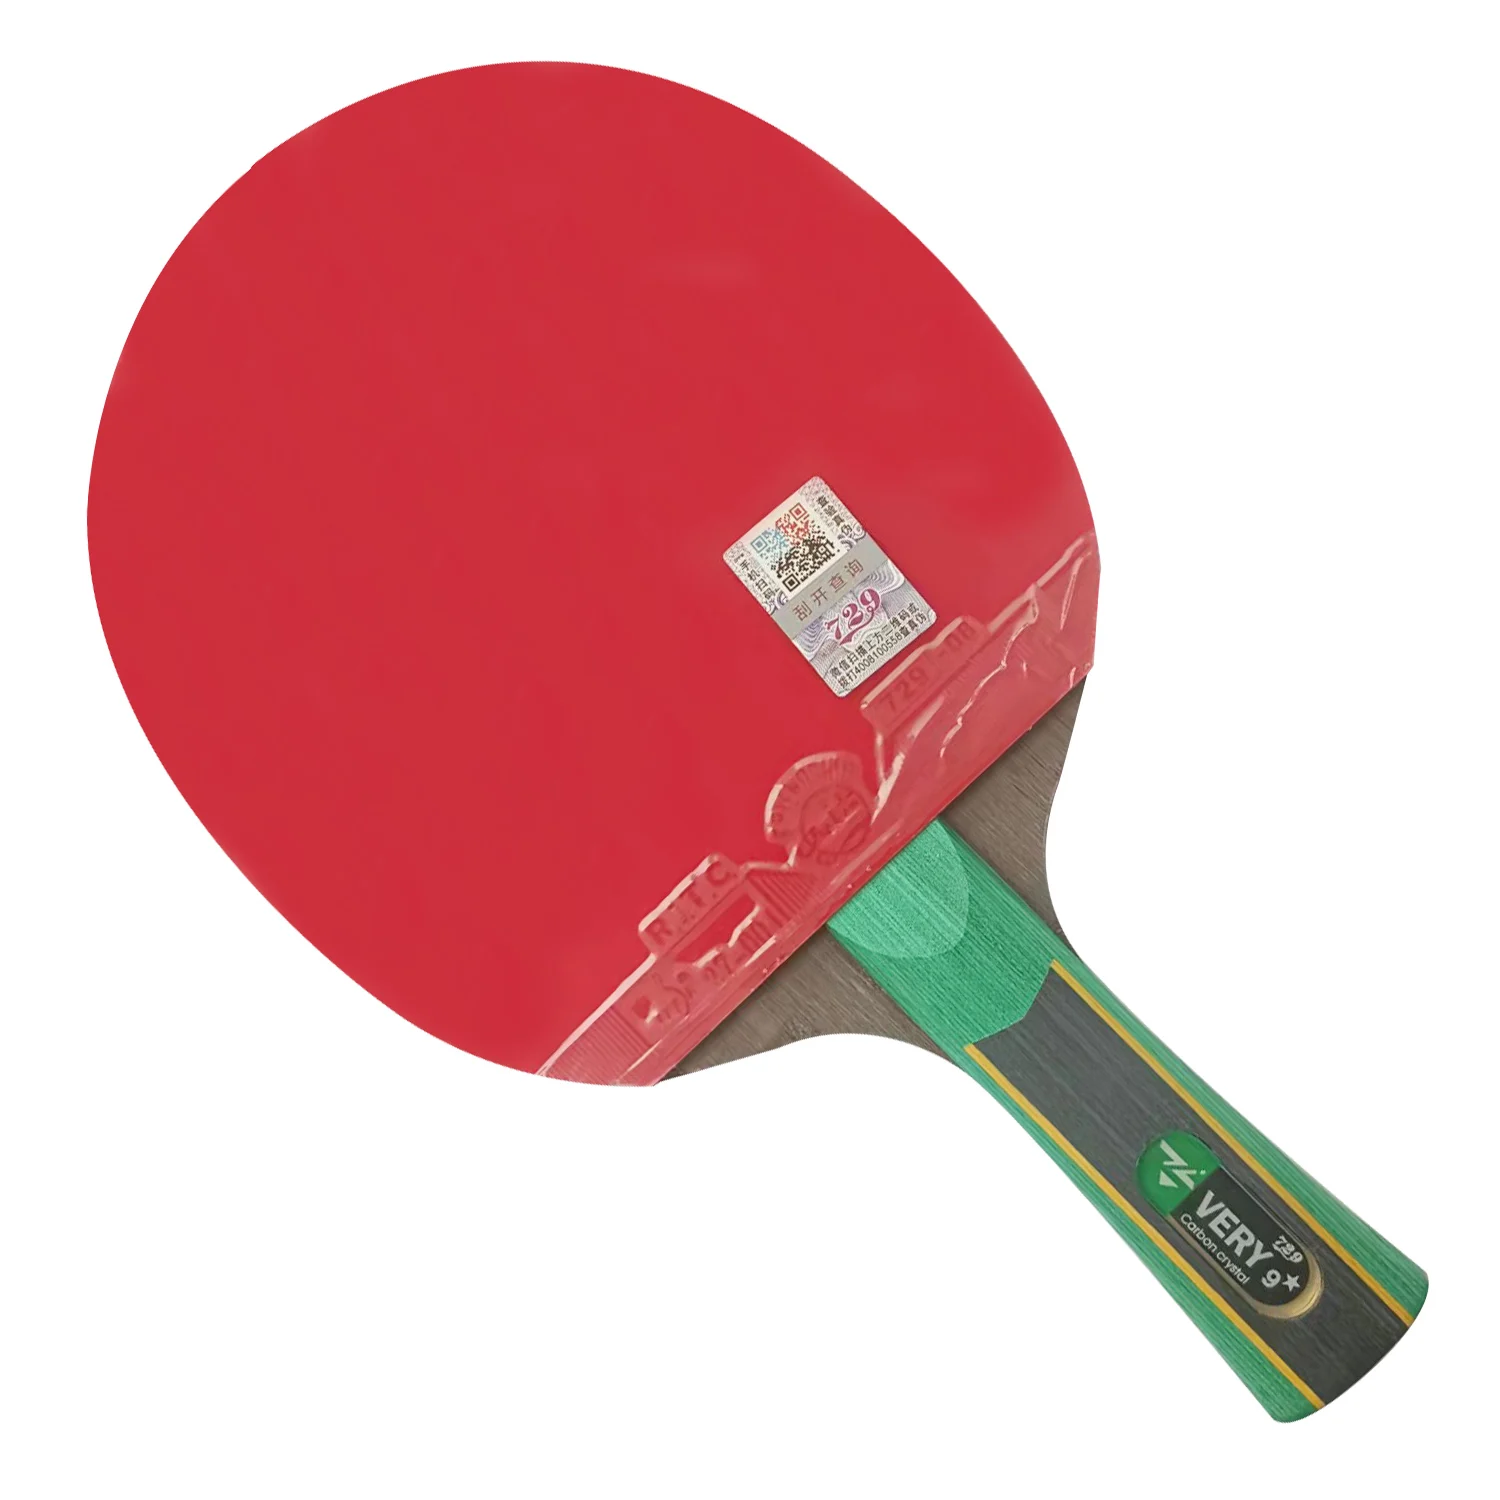 Original 729 finished racket Very-9 fast attack with loop carbon table tennis racket ping pong racquet pimples in for both side